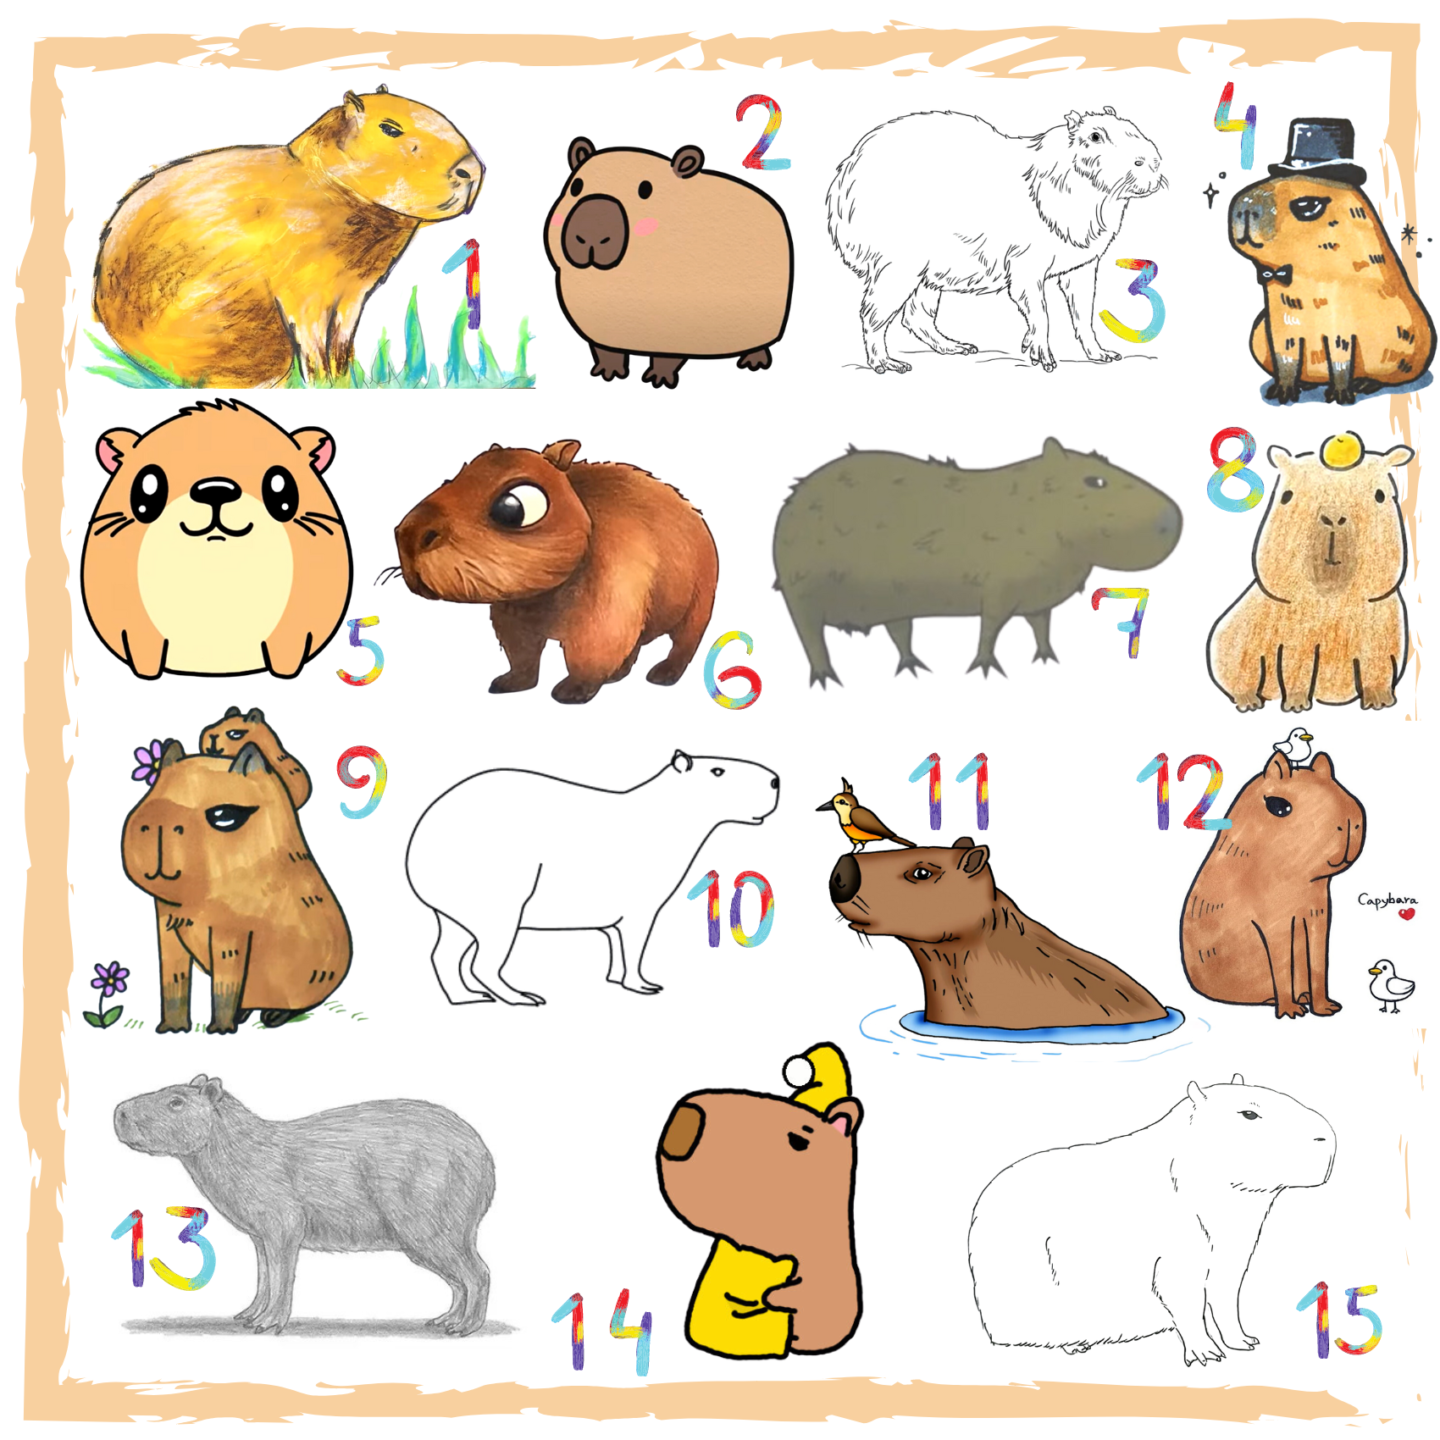 How To Draw A Capybara Easy Step-By-Step Tutorials